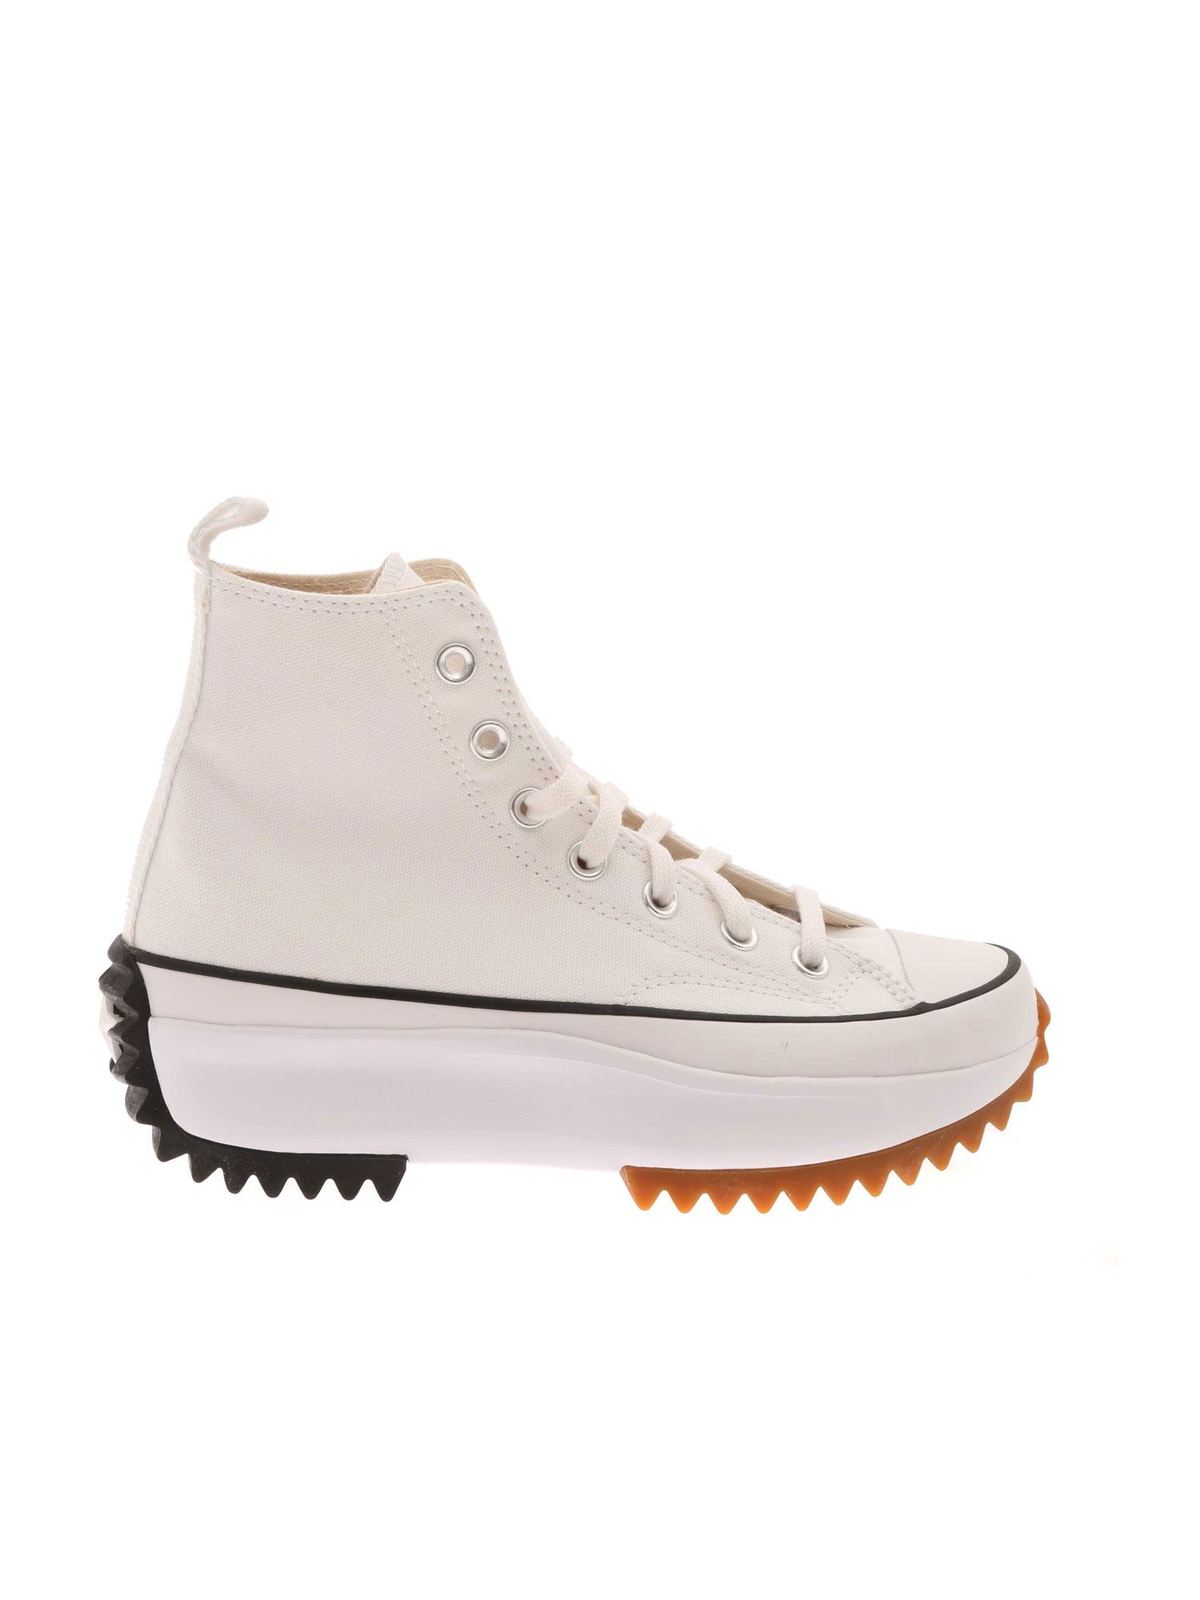 Flat shoes Converse - Run Star Hike sneakers in white - 166799C